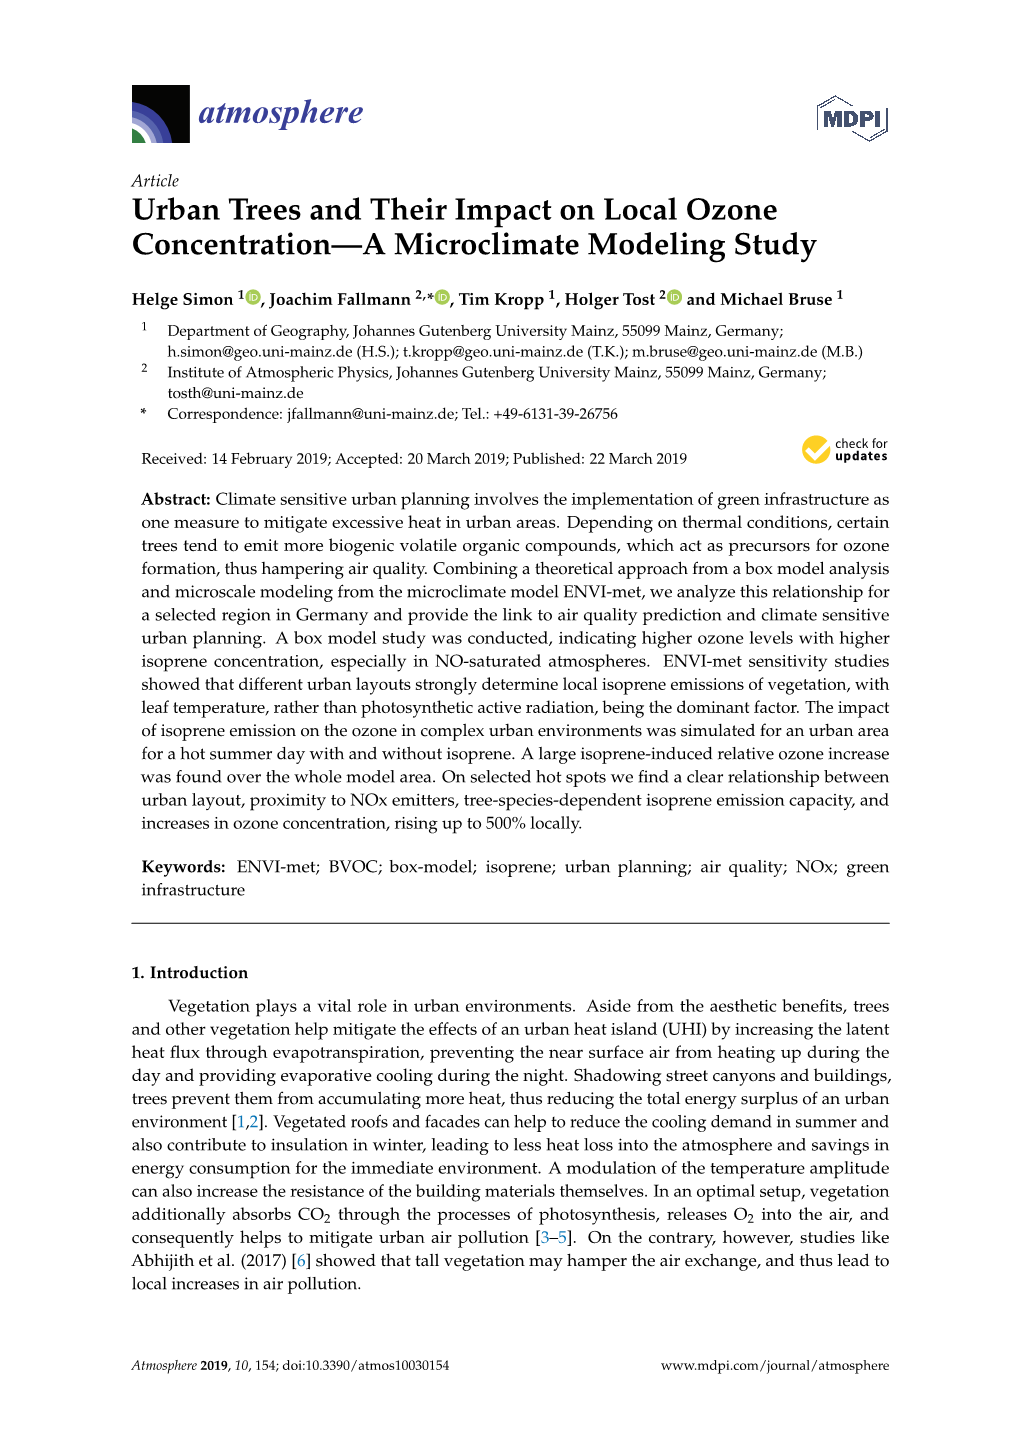 Urban Trees and Their Impact on Local Ozone Concentration—A Microclimate Modeling Study